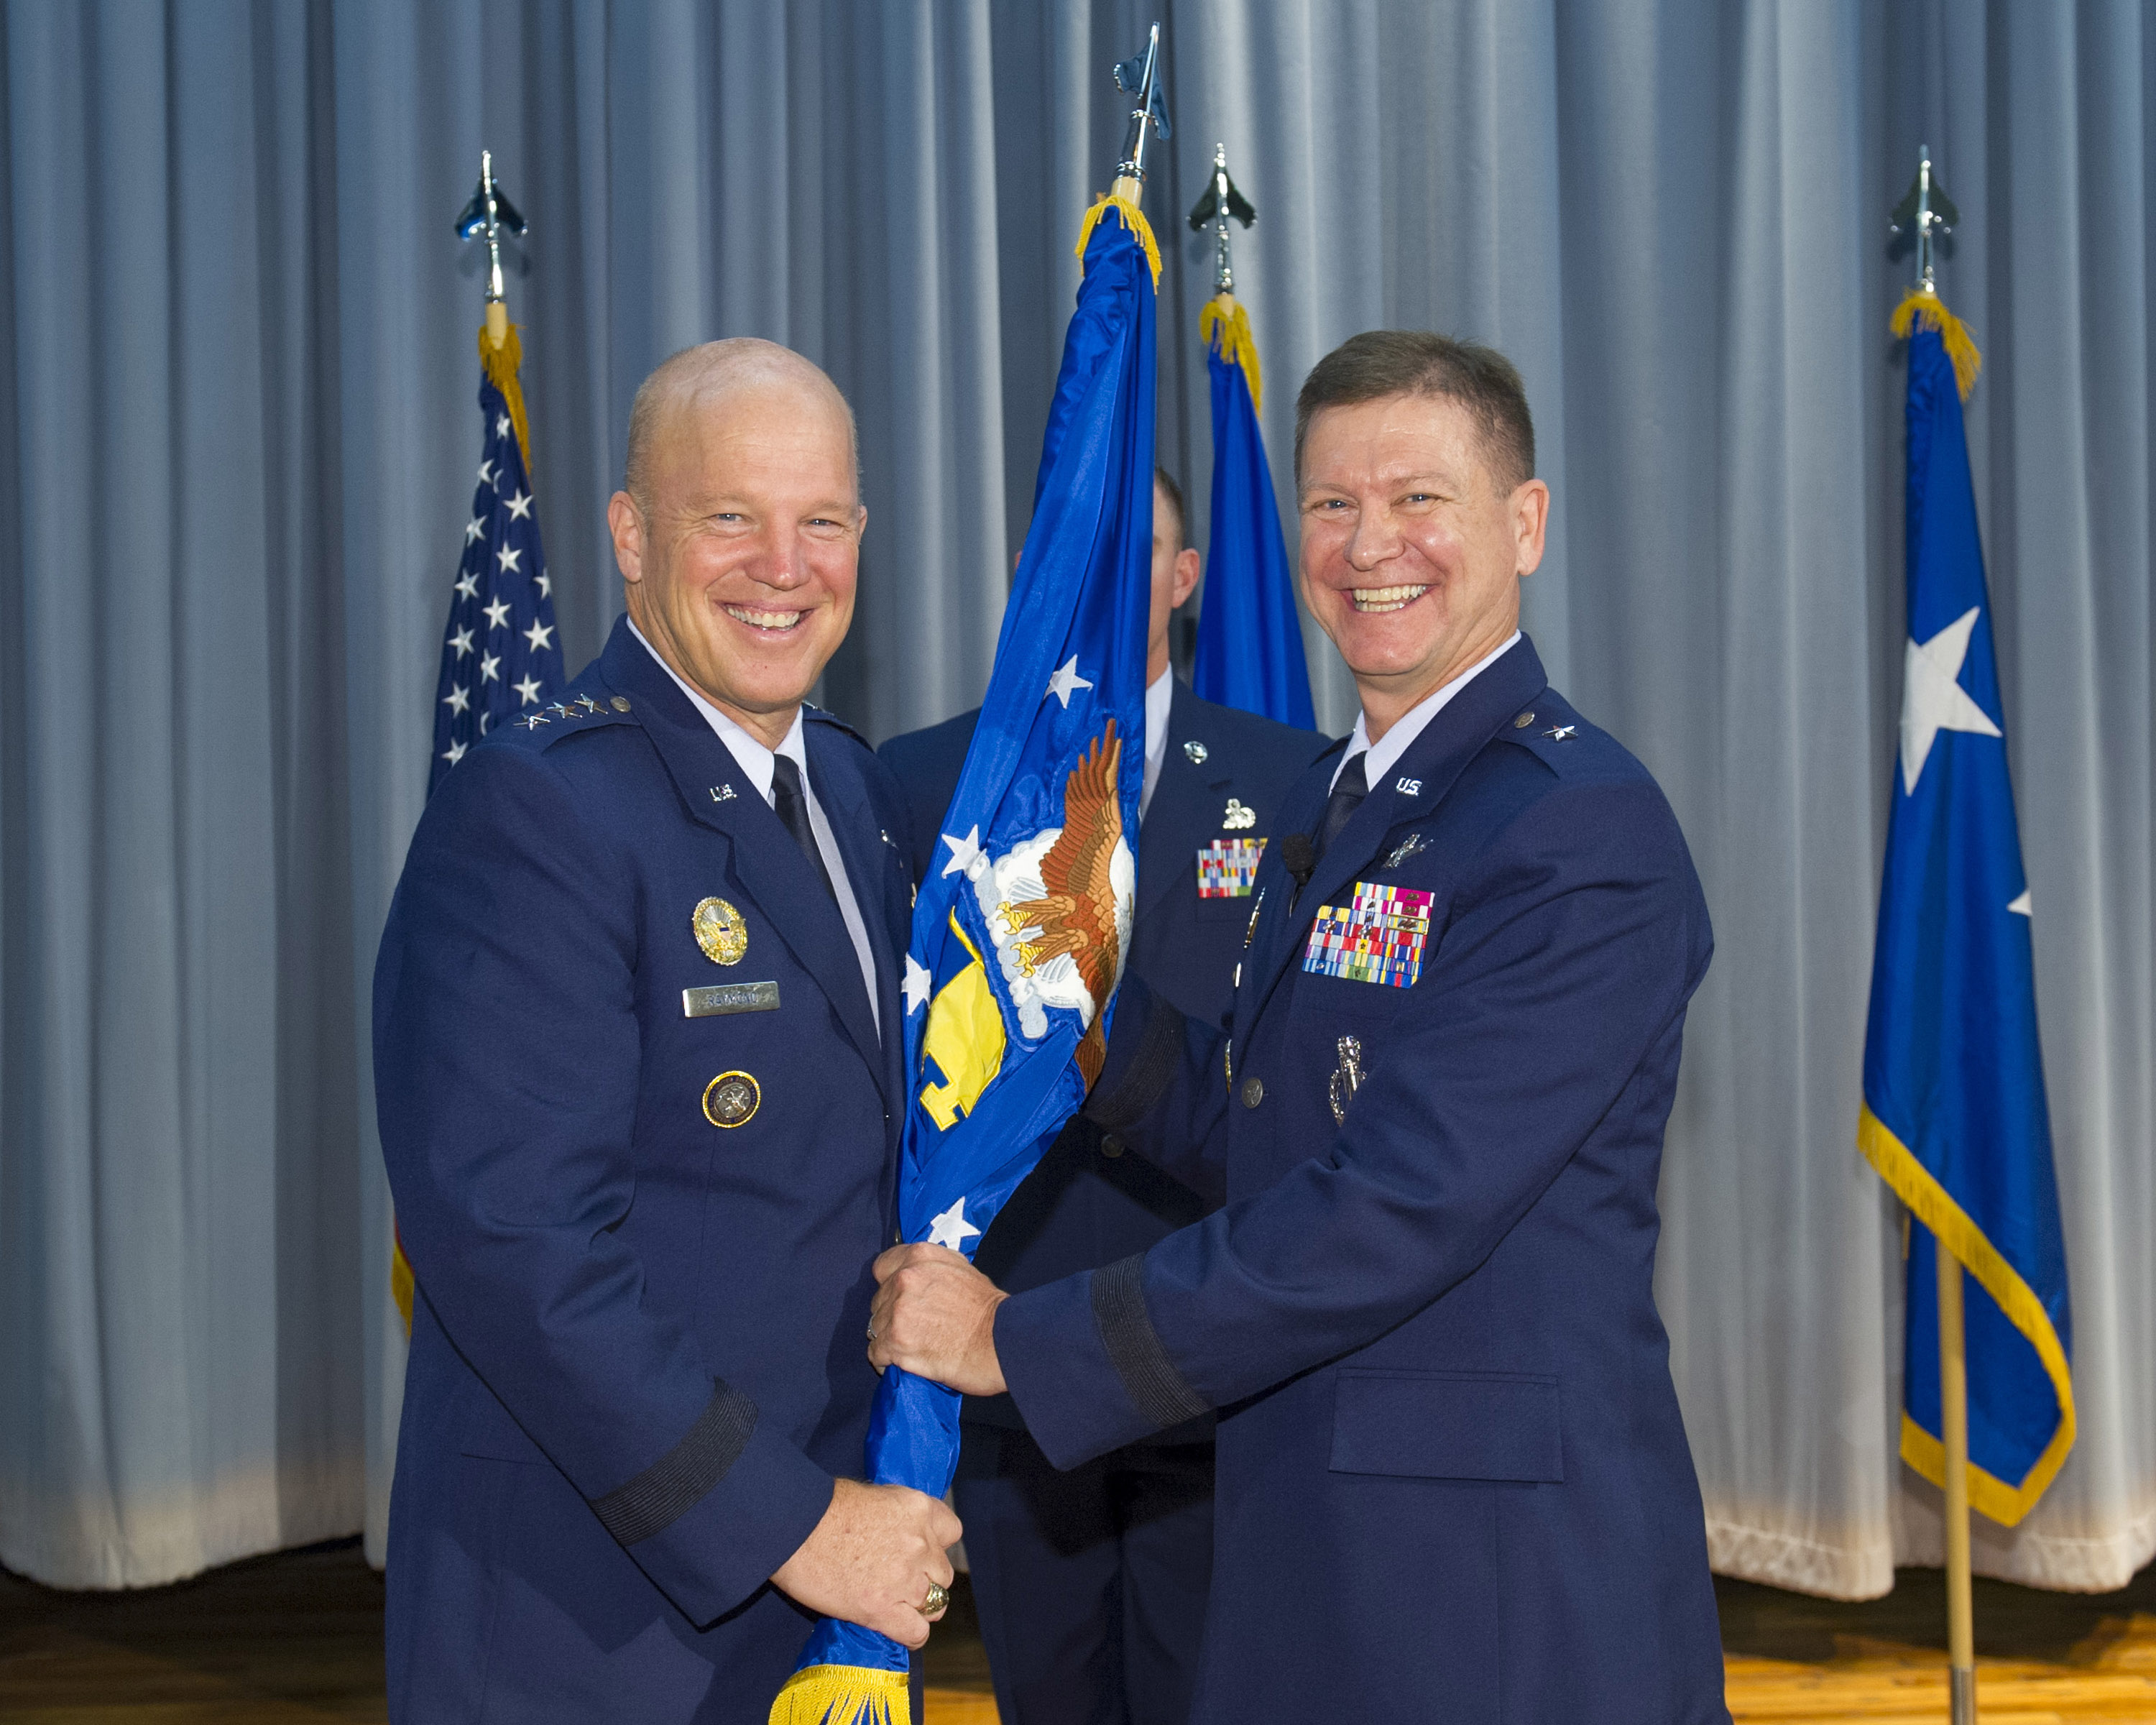 Lt. Gen. John W. "Jay" Raymond, commander, 14th Air Force (Air Forces Strategic) and Joint Functional Component Command for Space, presents Brig. Gen. Wayne Monteith, 45th Space Wing commander during a change of command ceremony, Aug. 4, 2015, at Patrick Air Force Base, Florida. Changes of command are a military tradition representing the transfer of responsibilities from the presiding officials to the upcoming official. Photo and Caption Credit: U.S. Air Force/Matthew Jurgens (Released) 